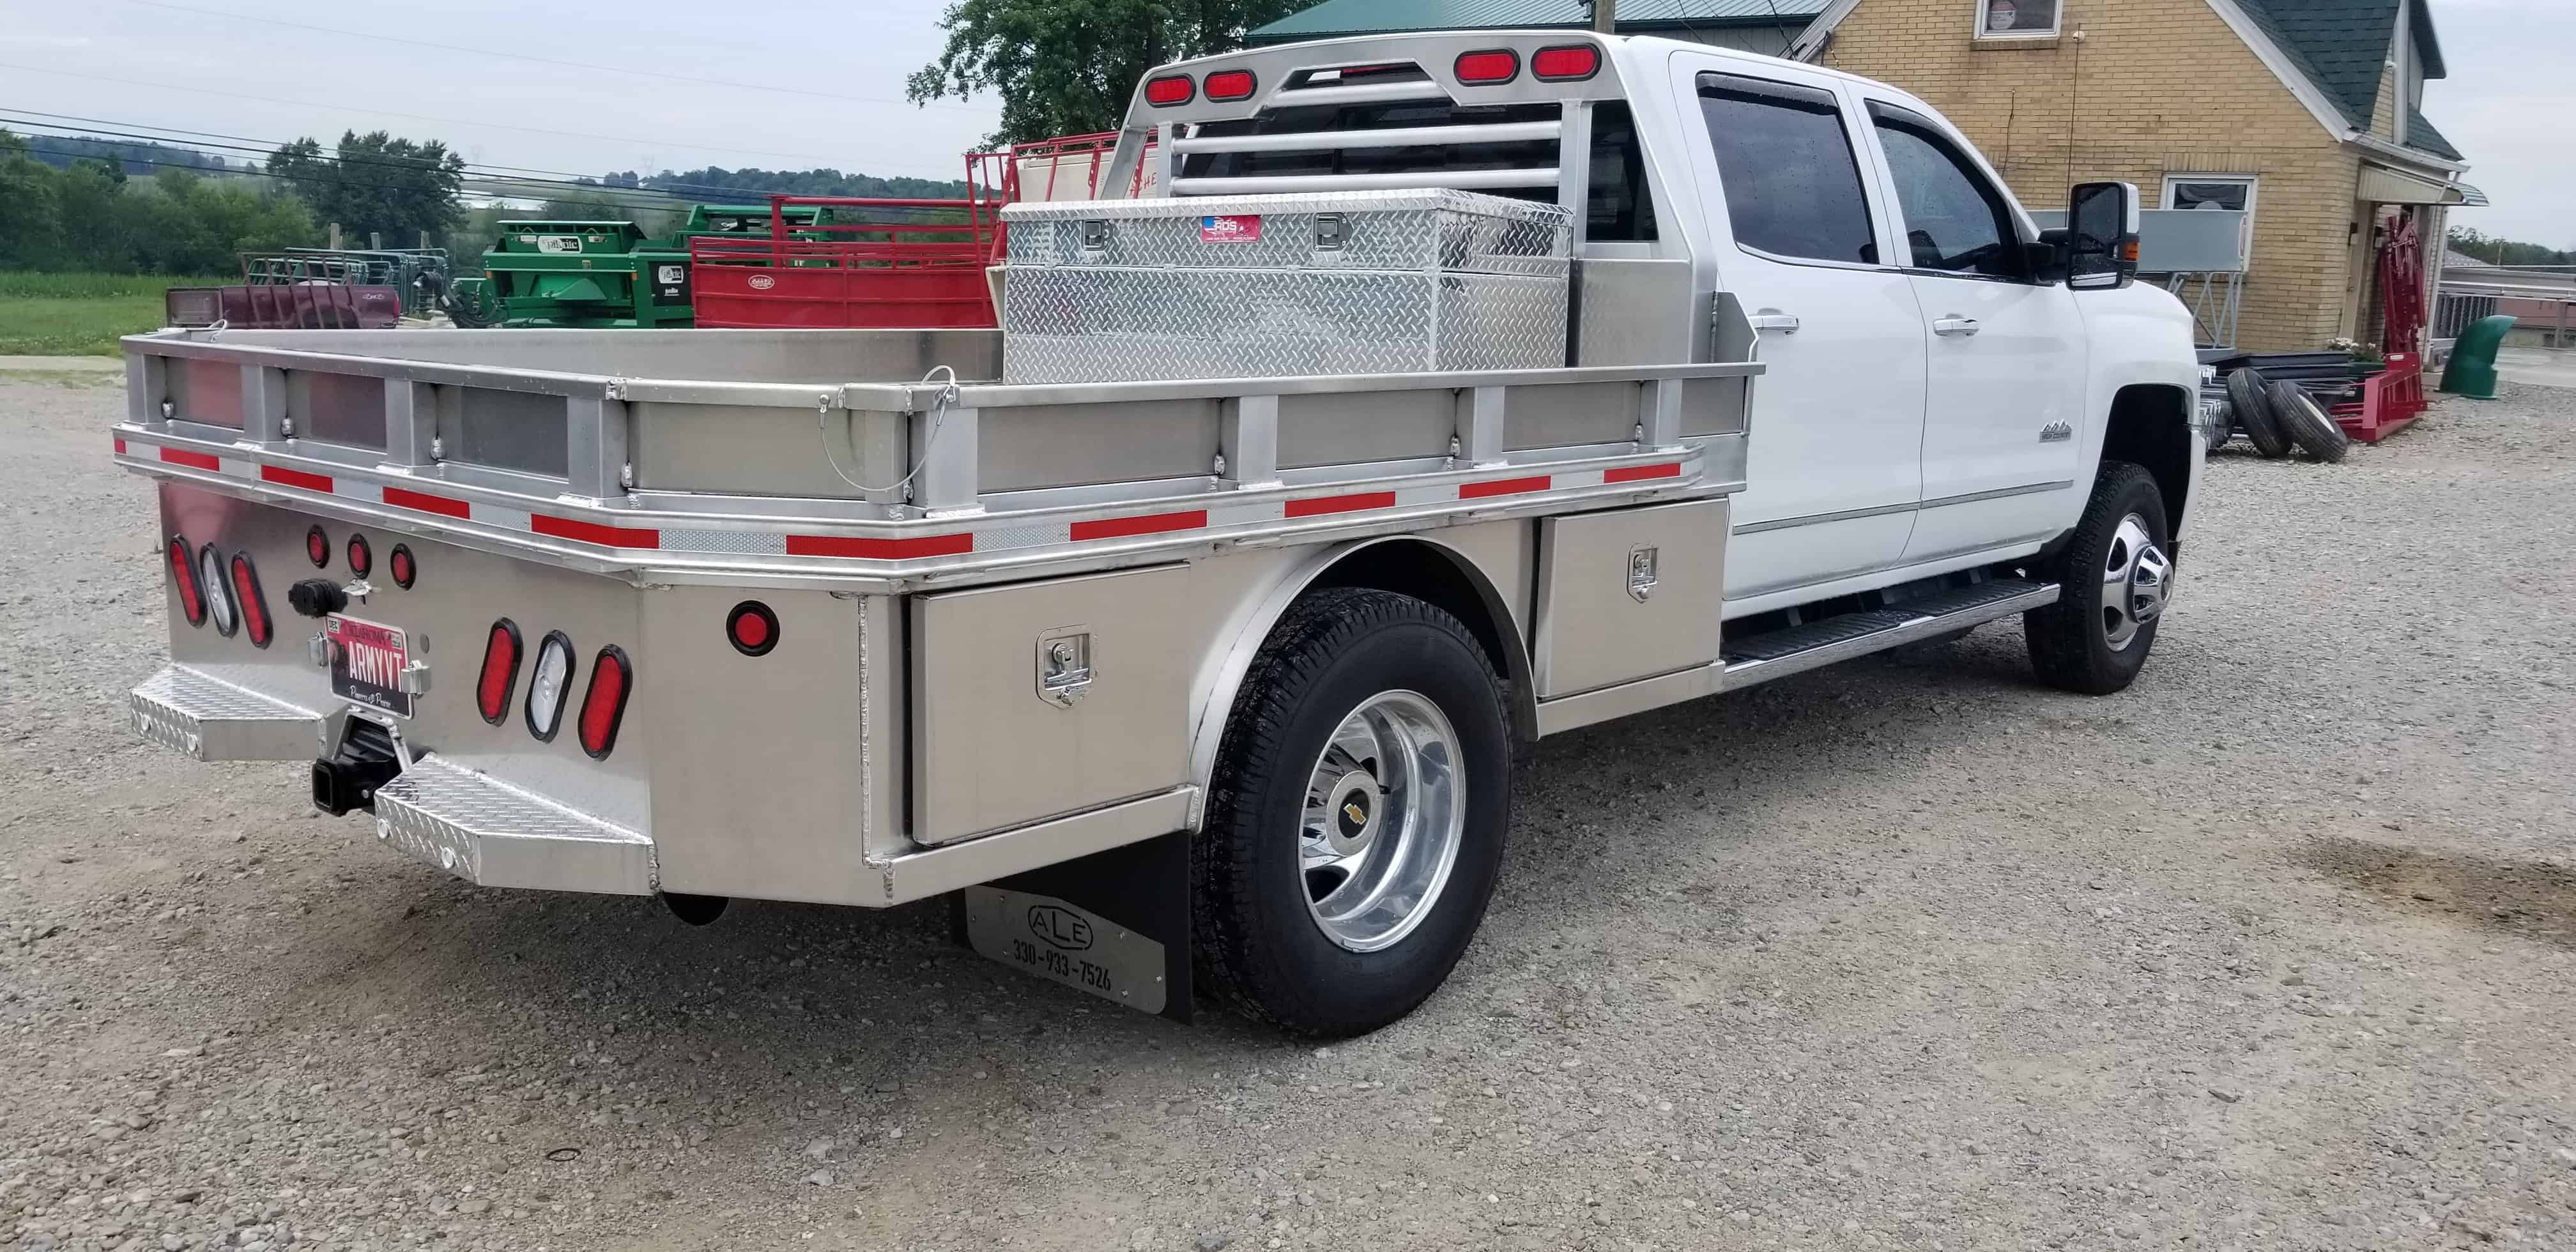 Take a look at our Aluminum Flatbeds. Get yours ordered today!!